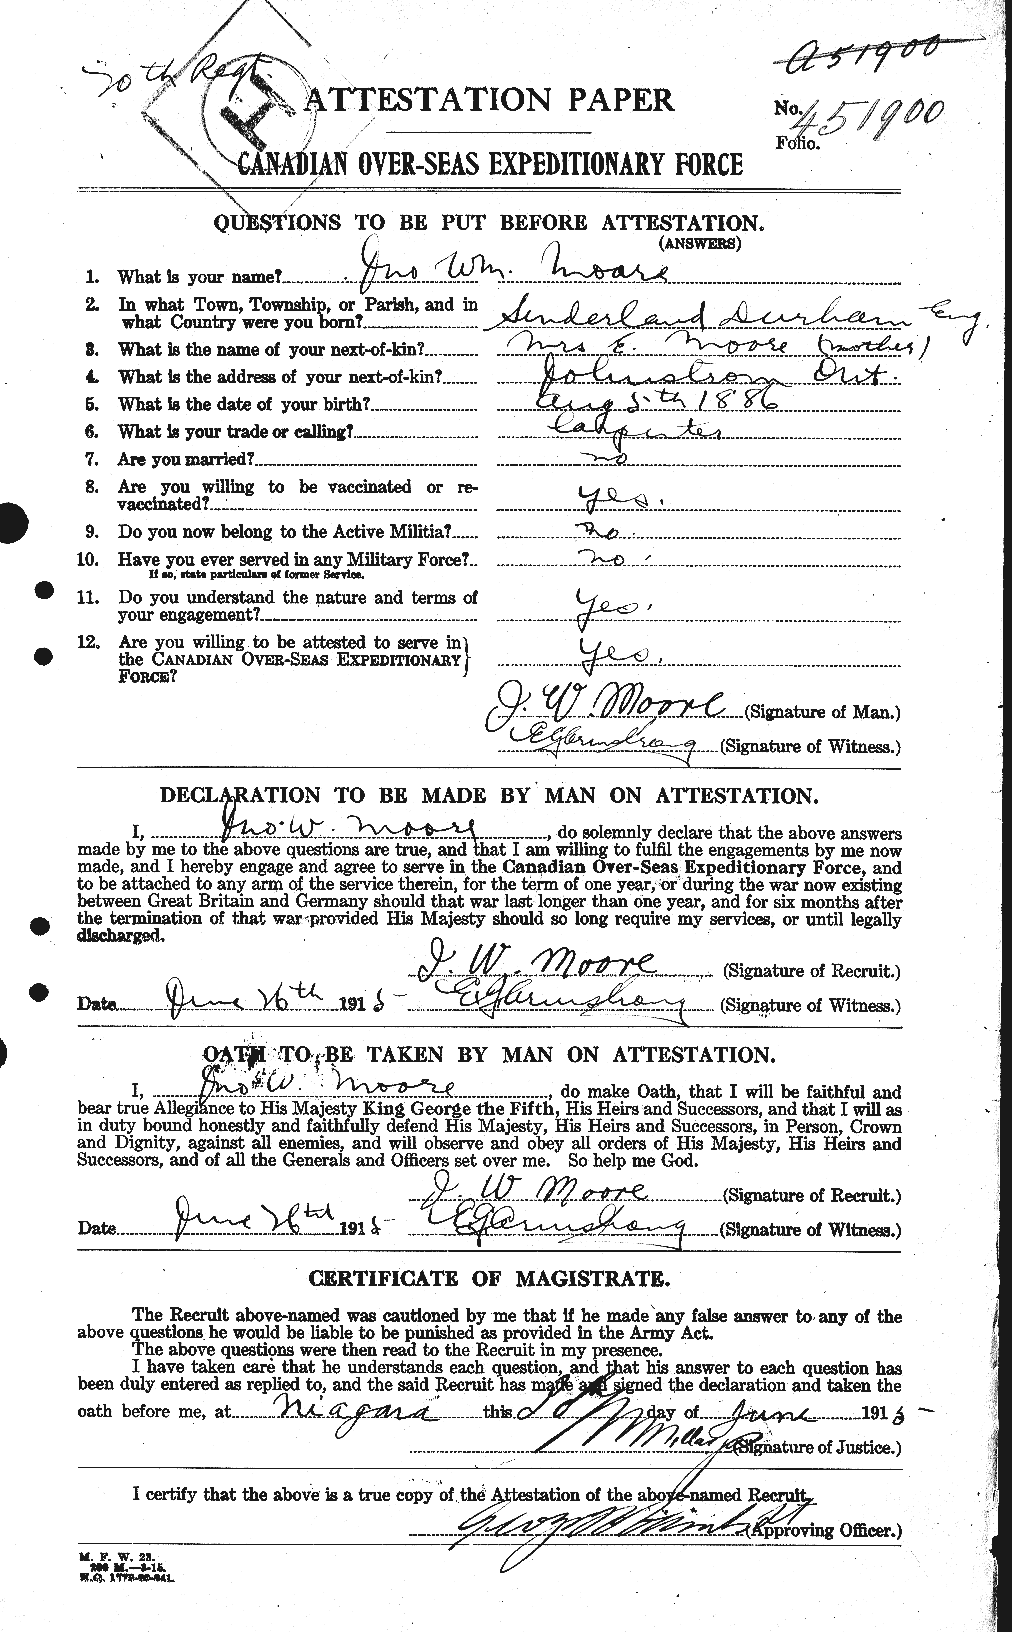 Personnel Records of the First World War - CEF 503348a